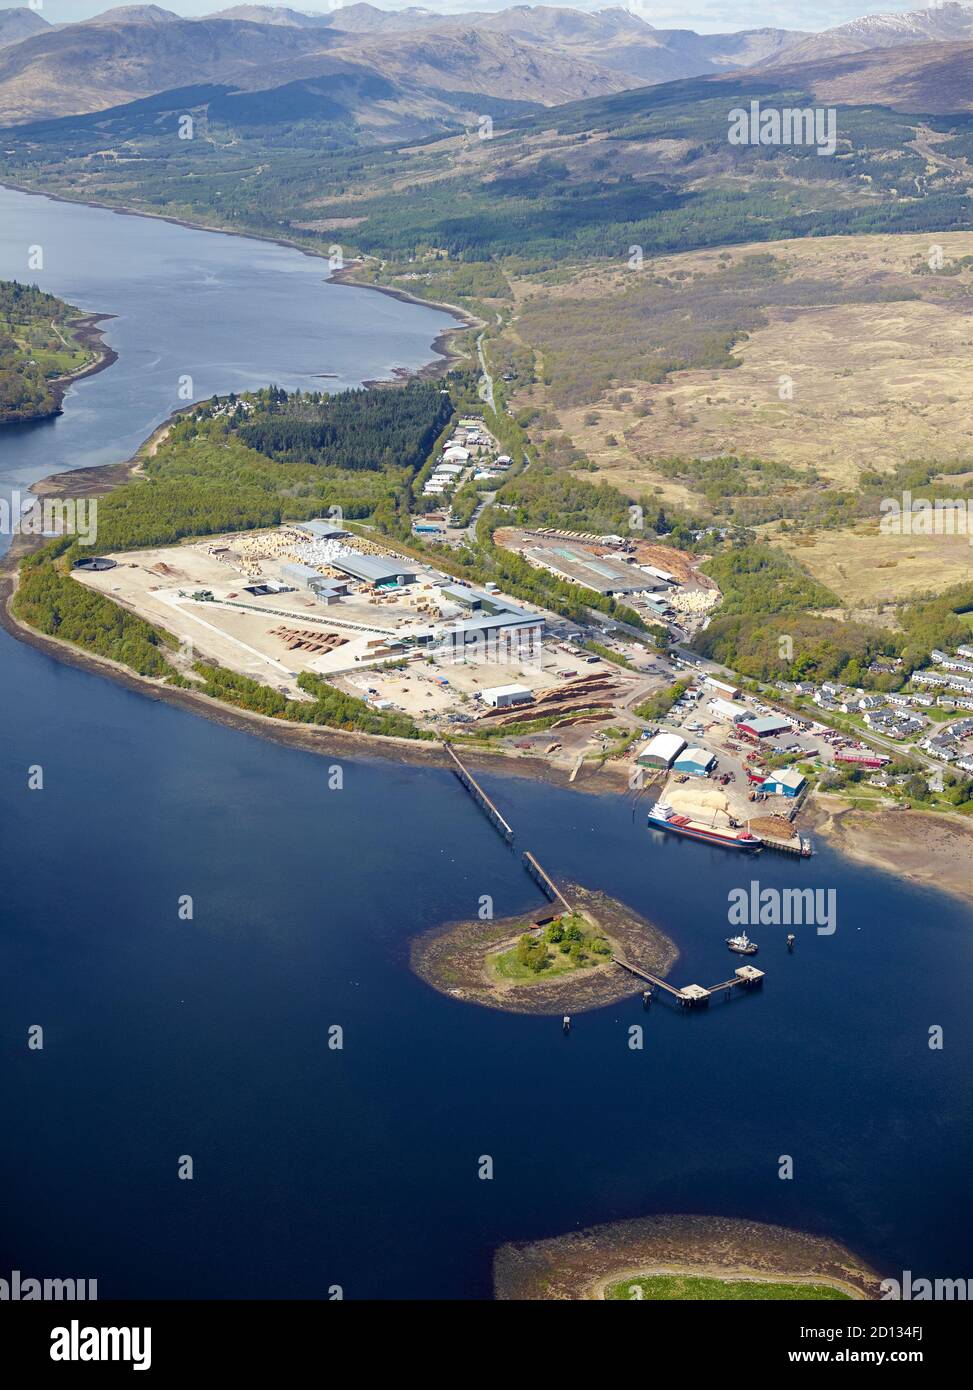 An aerial view of a timber production facility on the shore of Loch Eil, Corpach, near Fort William, Highland Scotland, UK Stock Photo